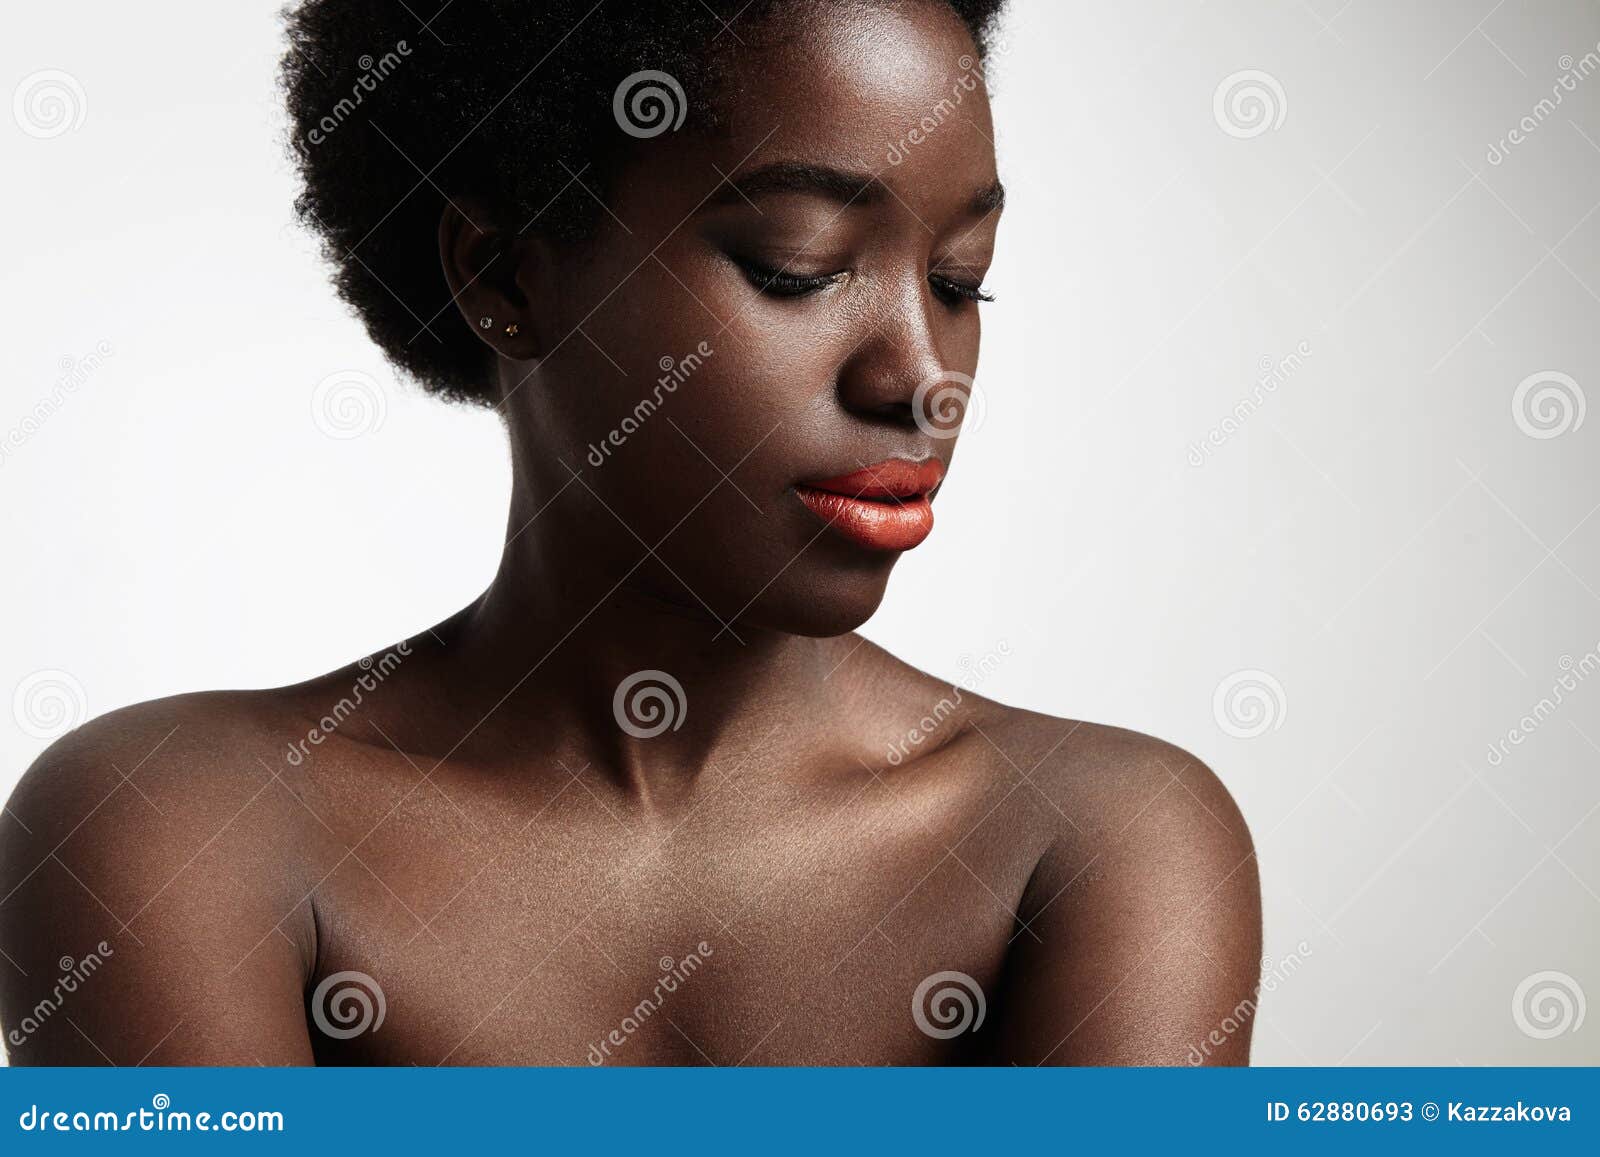 black woman with ideal skin